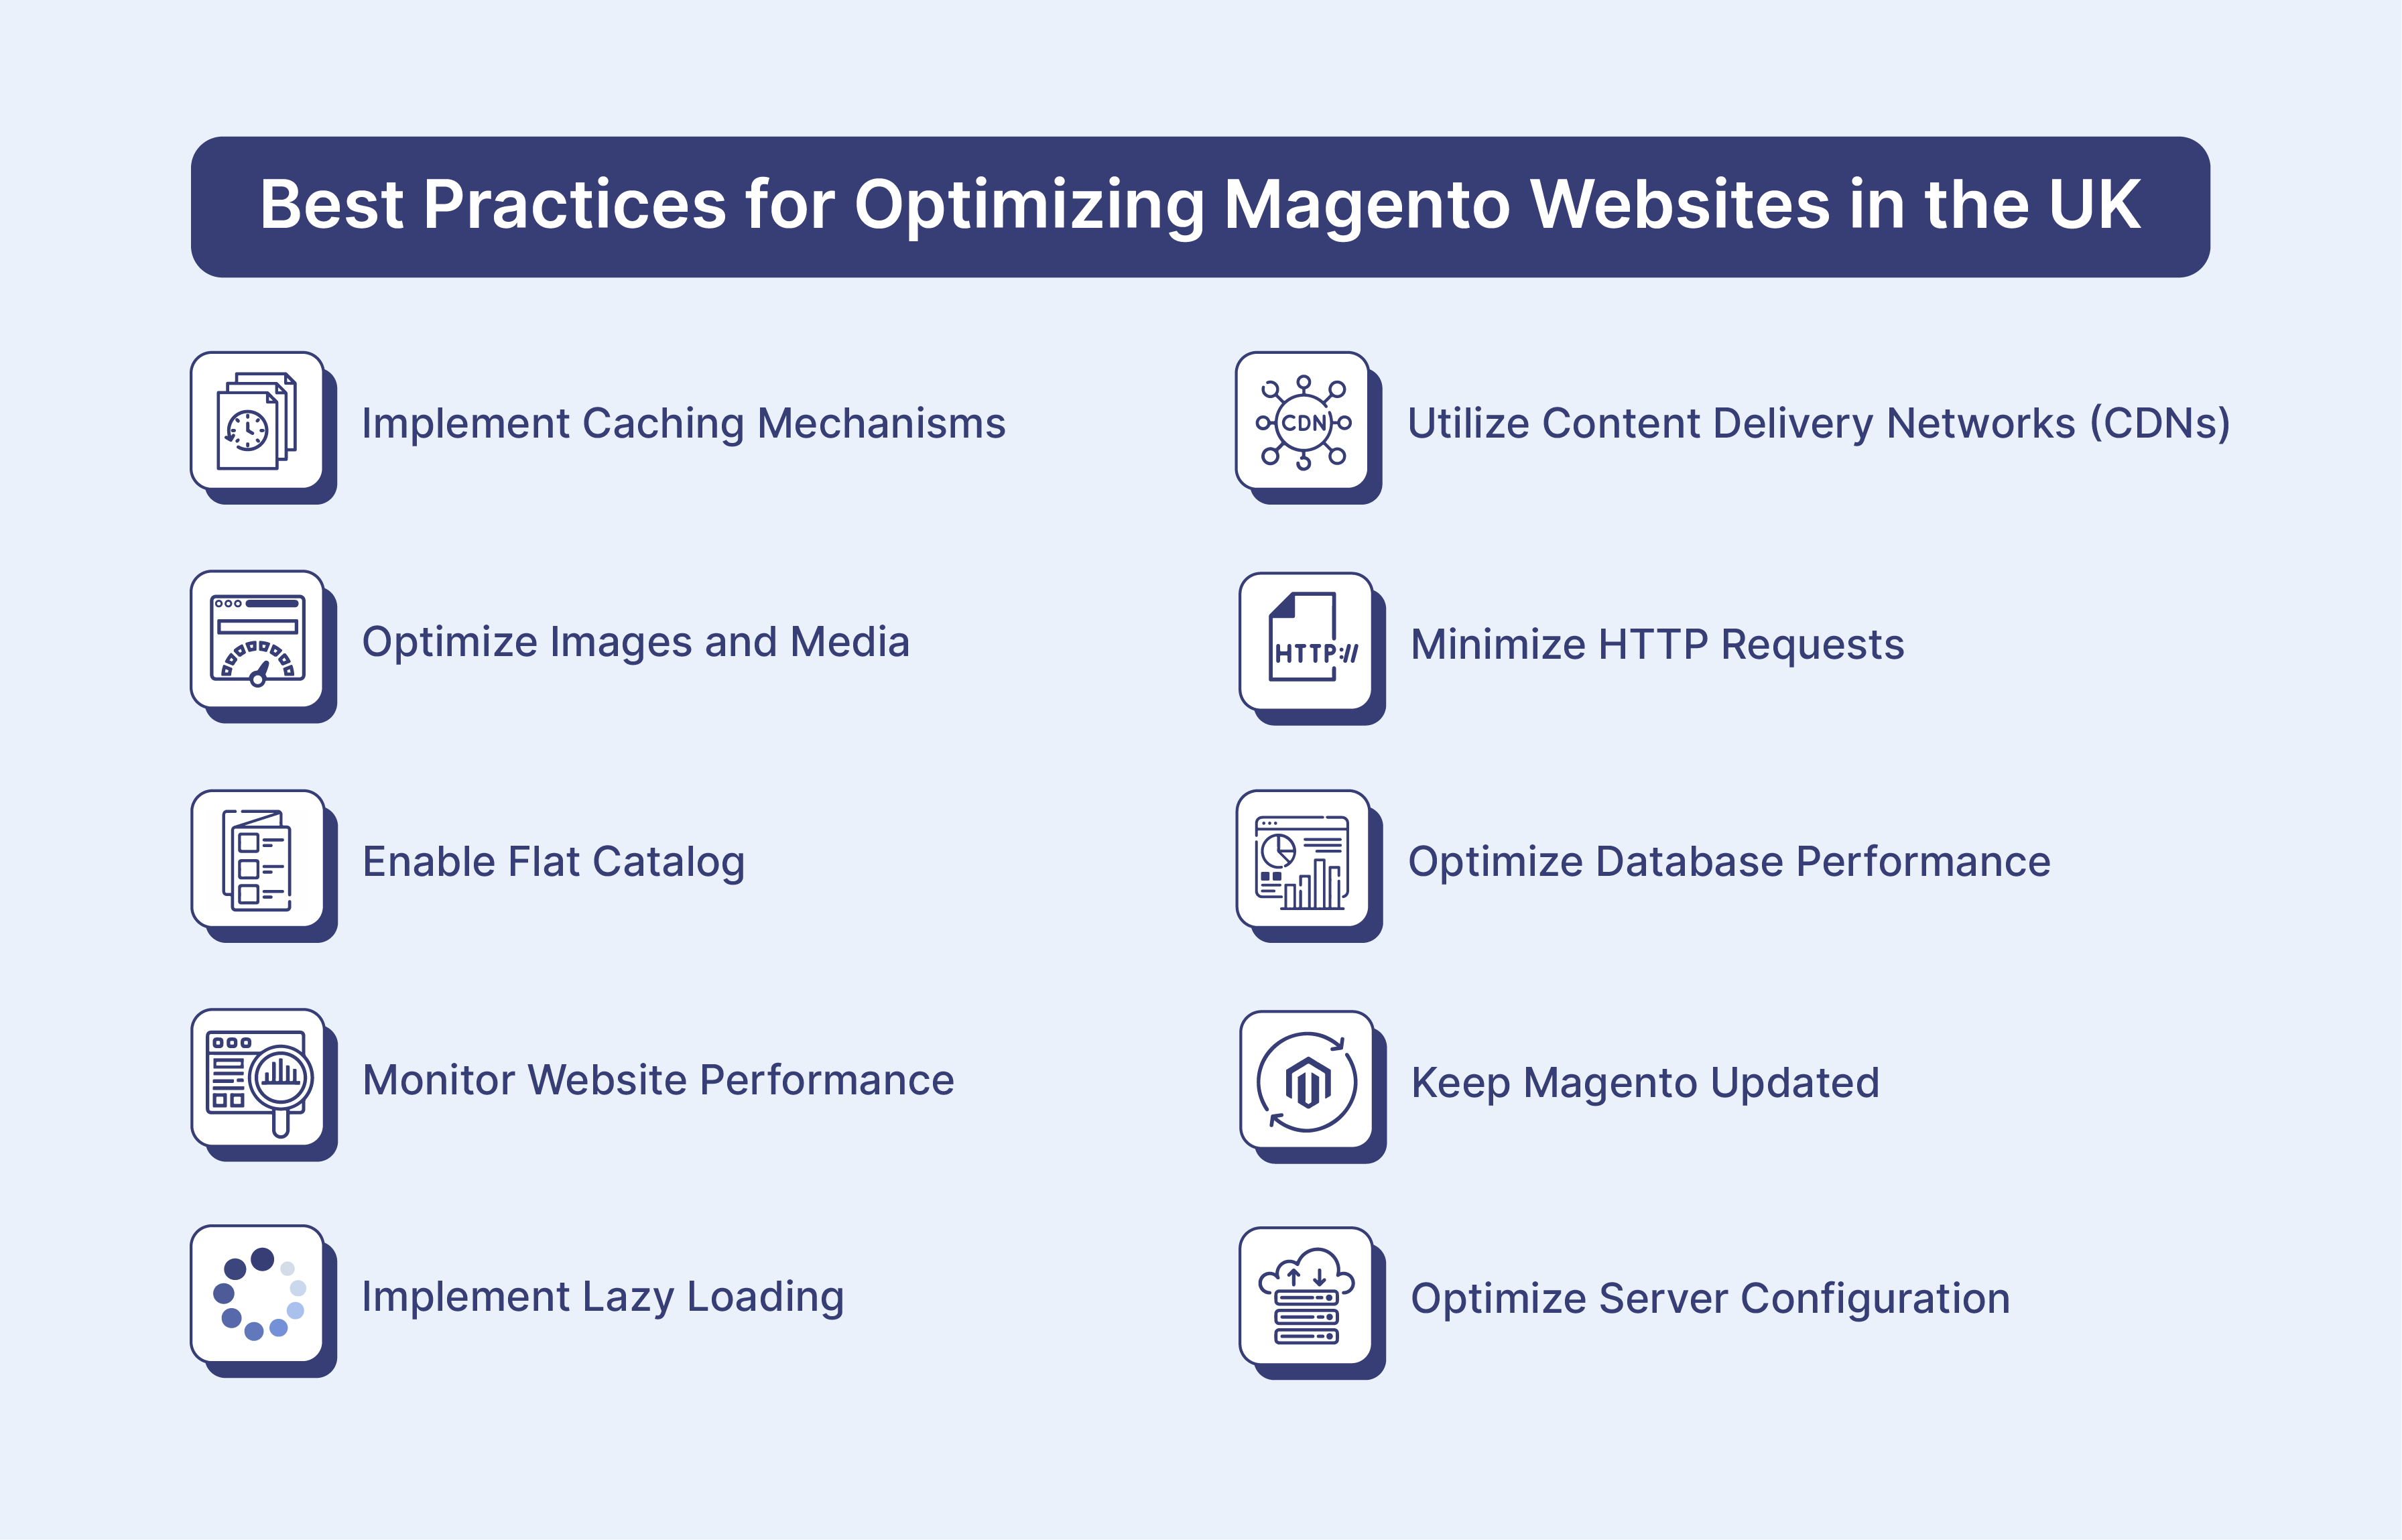 Best practices for optimizing Magento websites for UK businesses